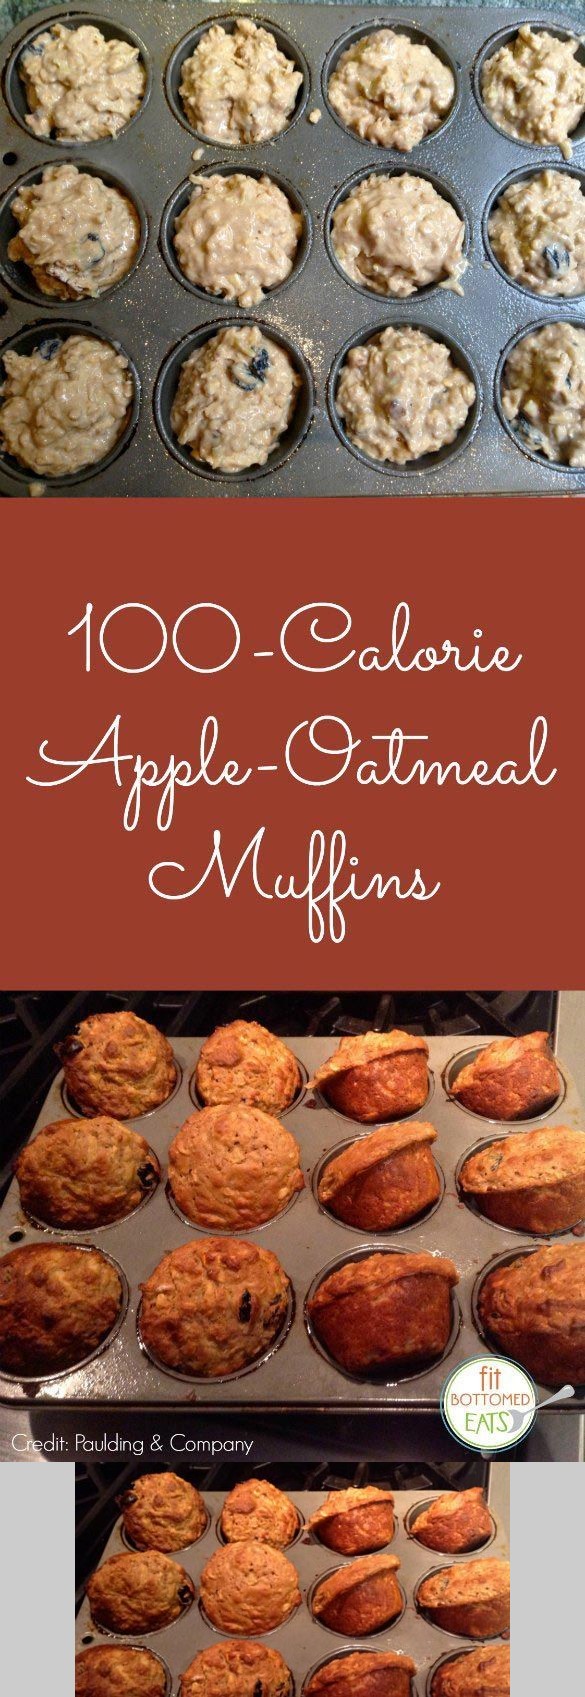 100-Calorie Apple-Oatmeal Muffins